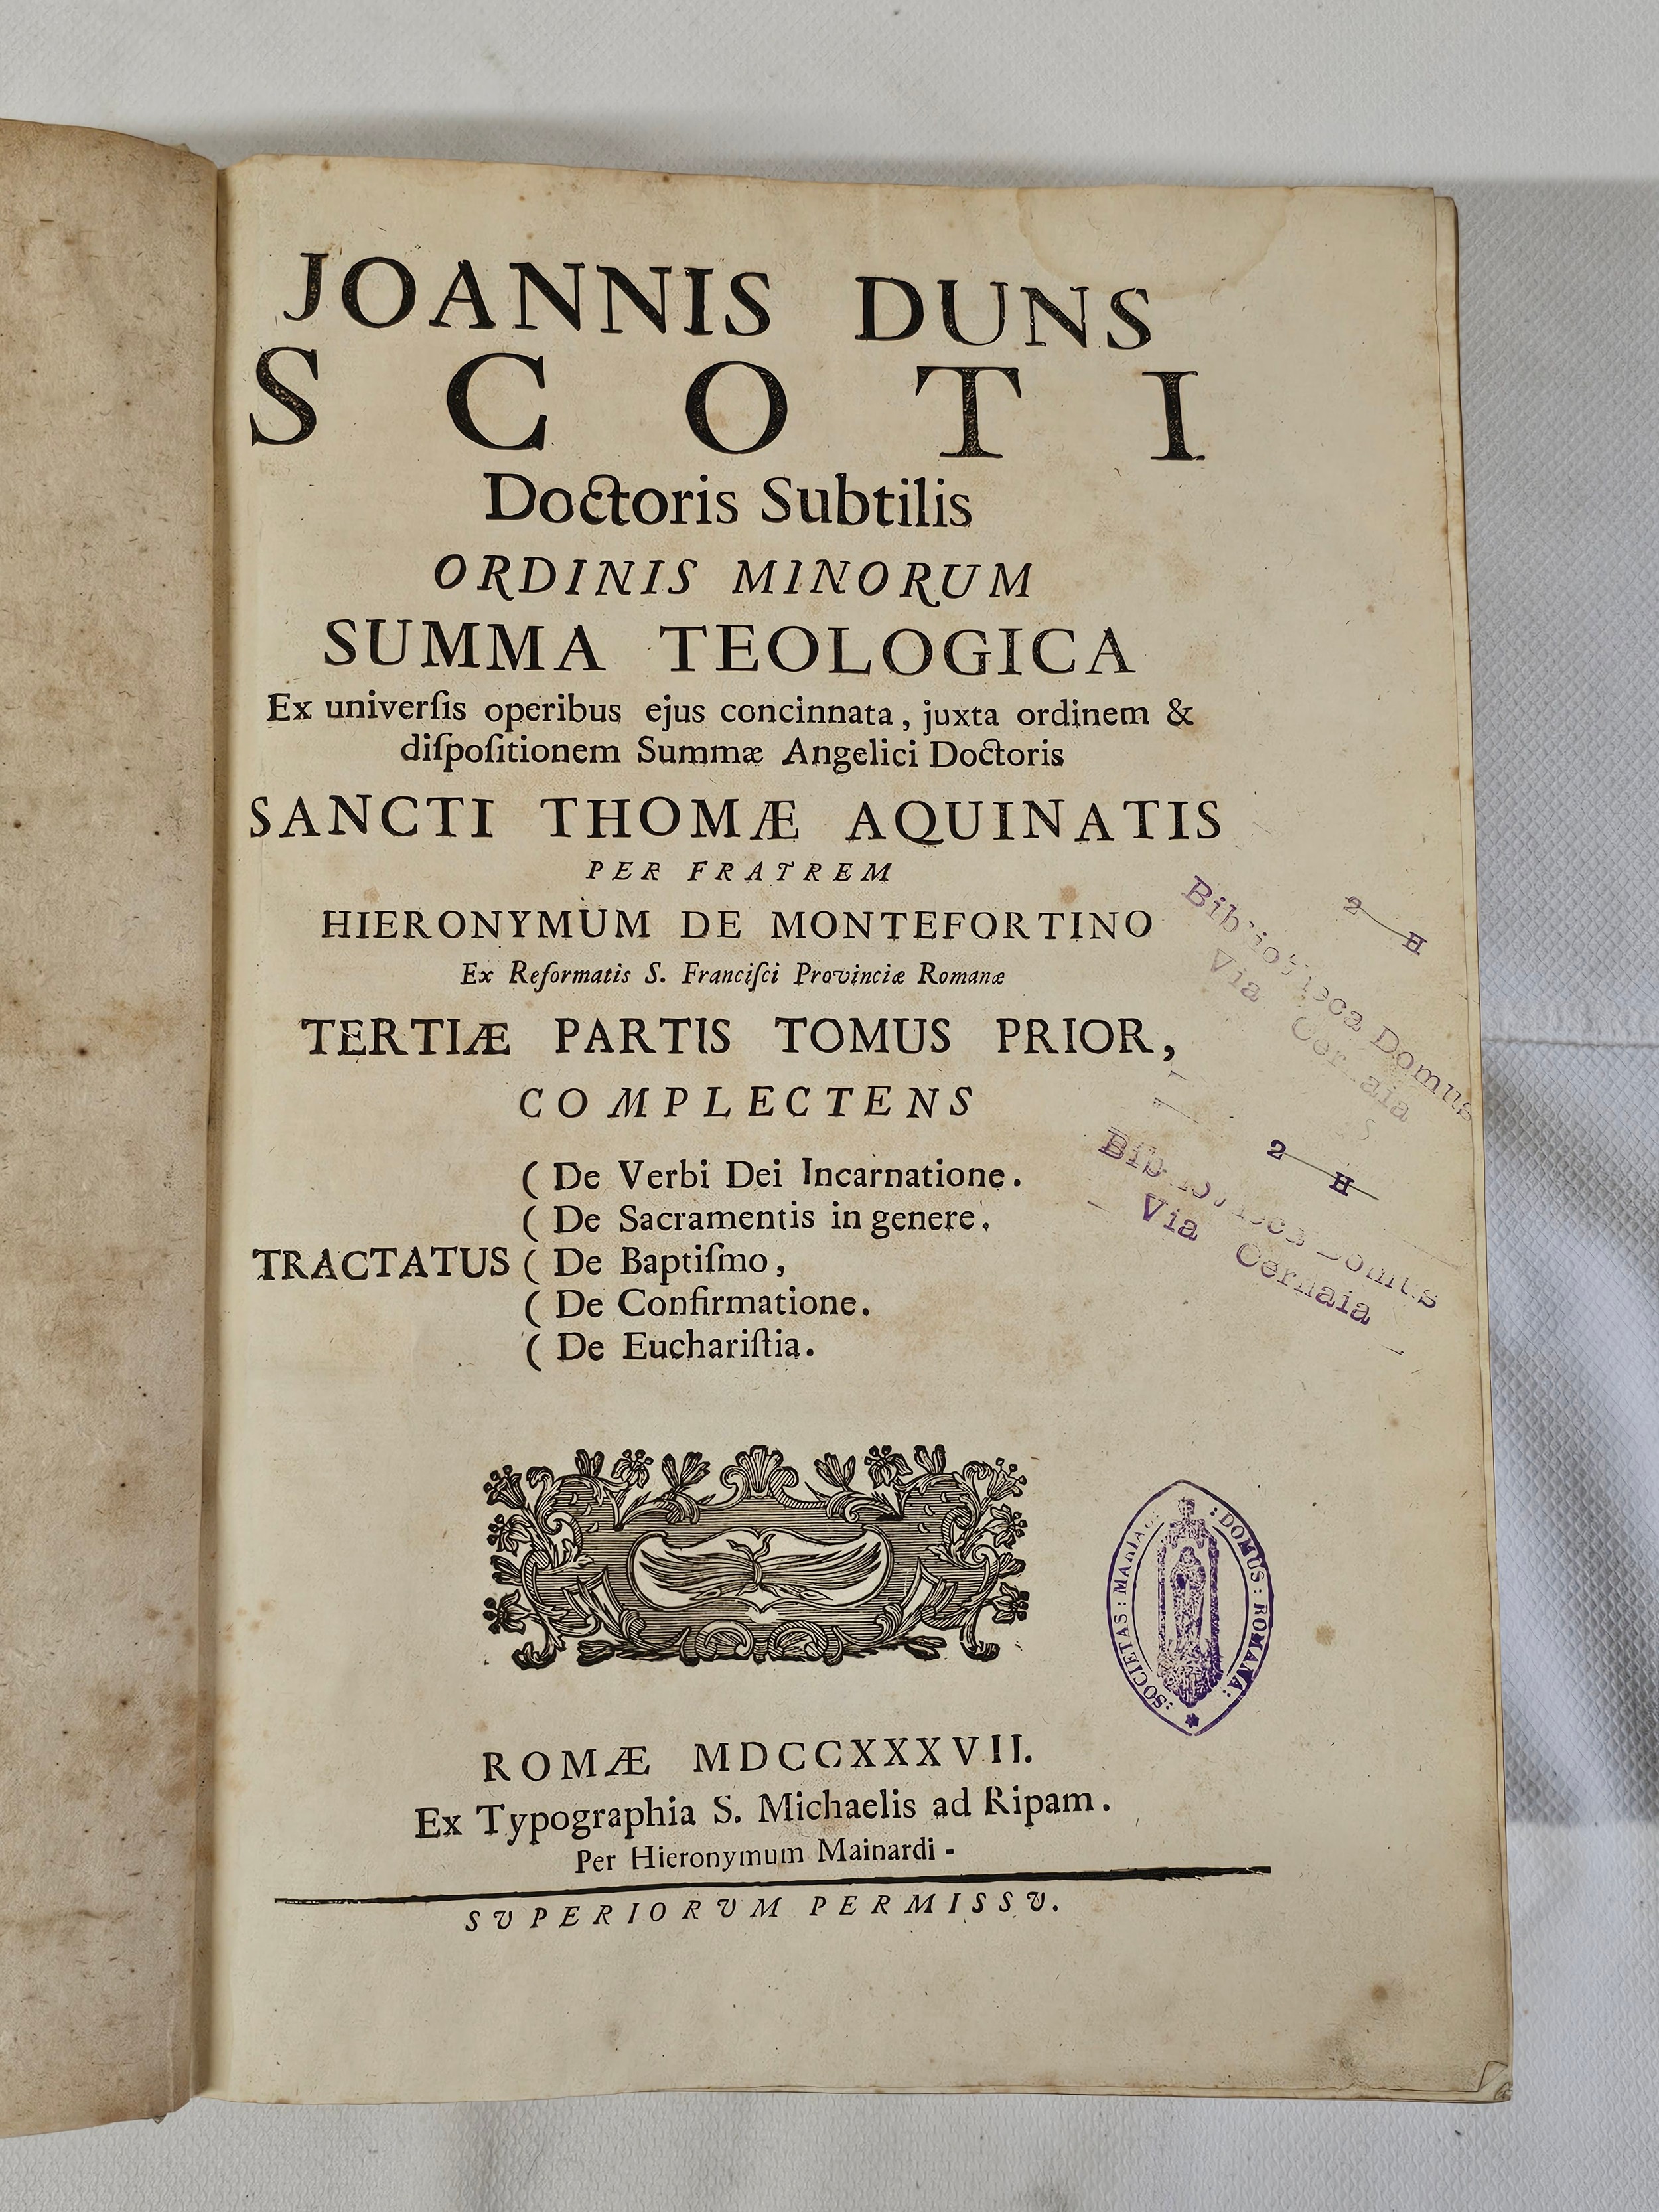 Joannis Duns Scoti doctoris subtilis. 1718. Volumes 1, 3 and, 4 only. Published Rome Typographia San - Image 3 of 5